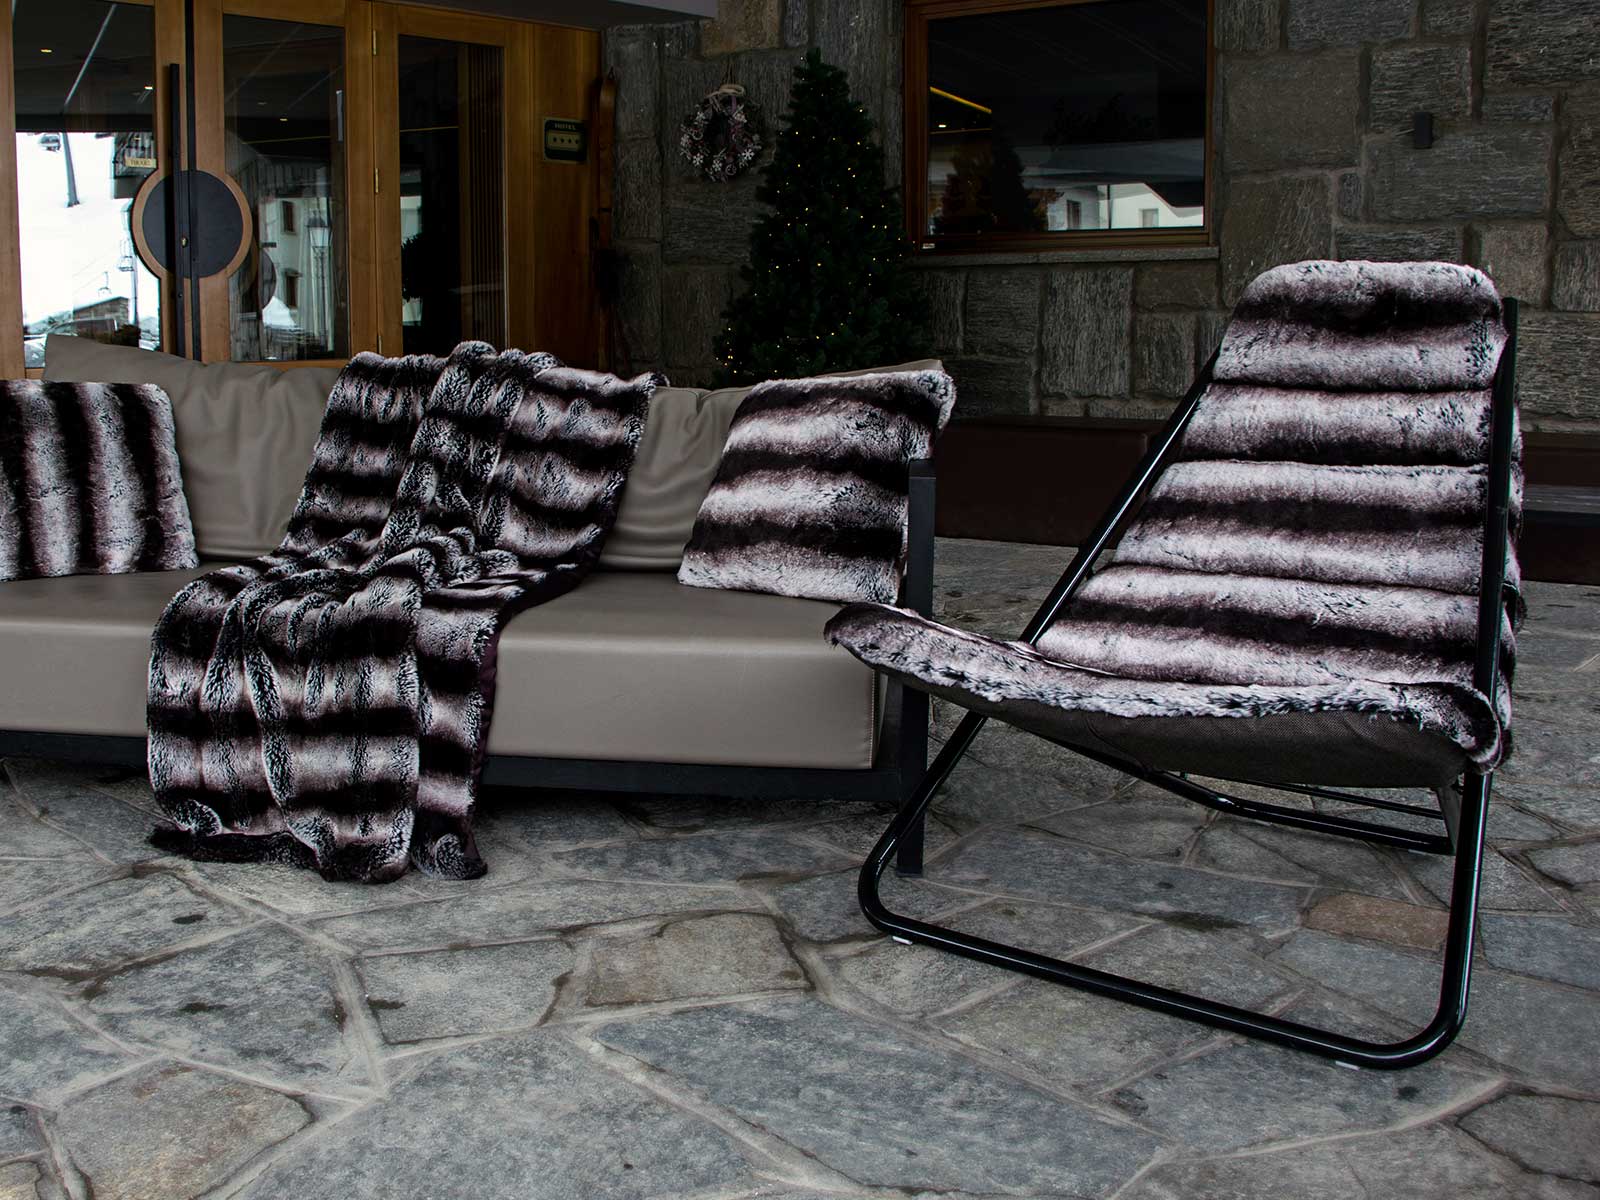 Stainless steel frame, gloss black finish. The deckchair in eco-leather (chinchilla or grey fox) is suitable for outdoor use in the most luxurious chalets. gray fox, camel, alpaca, tabuk, chinchilla.